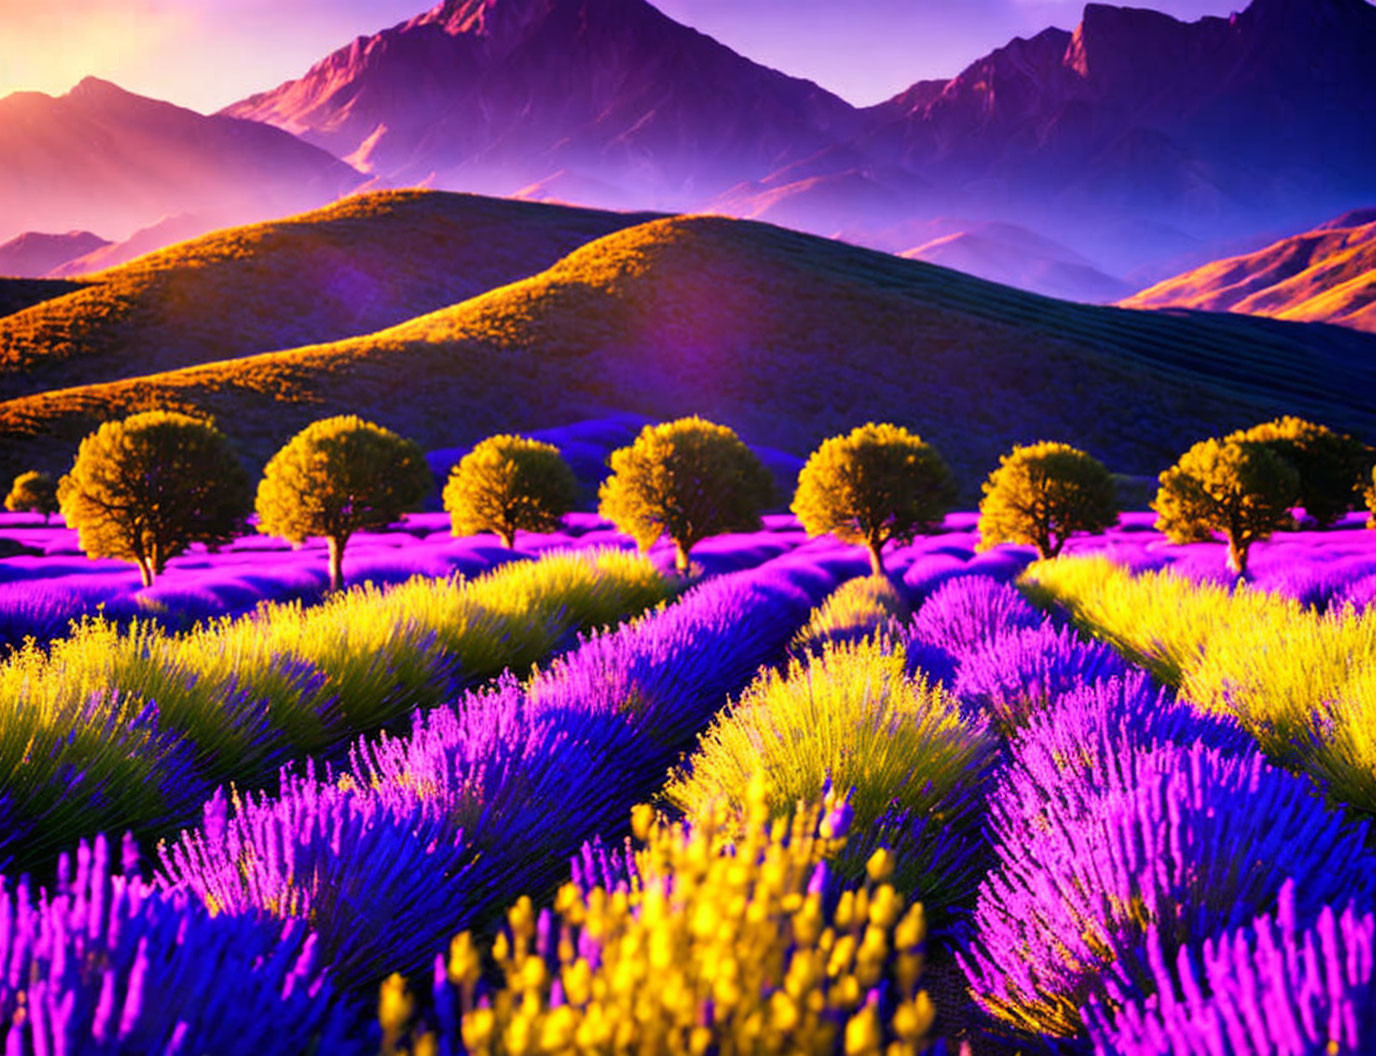 Lavender Fields with Greenery, Purple Sky, and Mountains